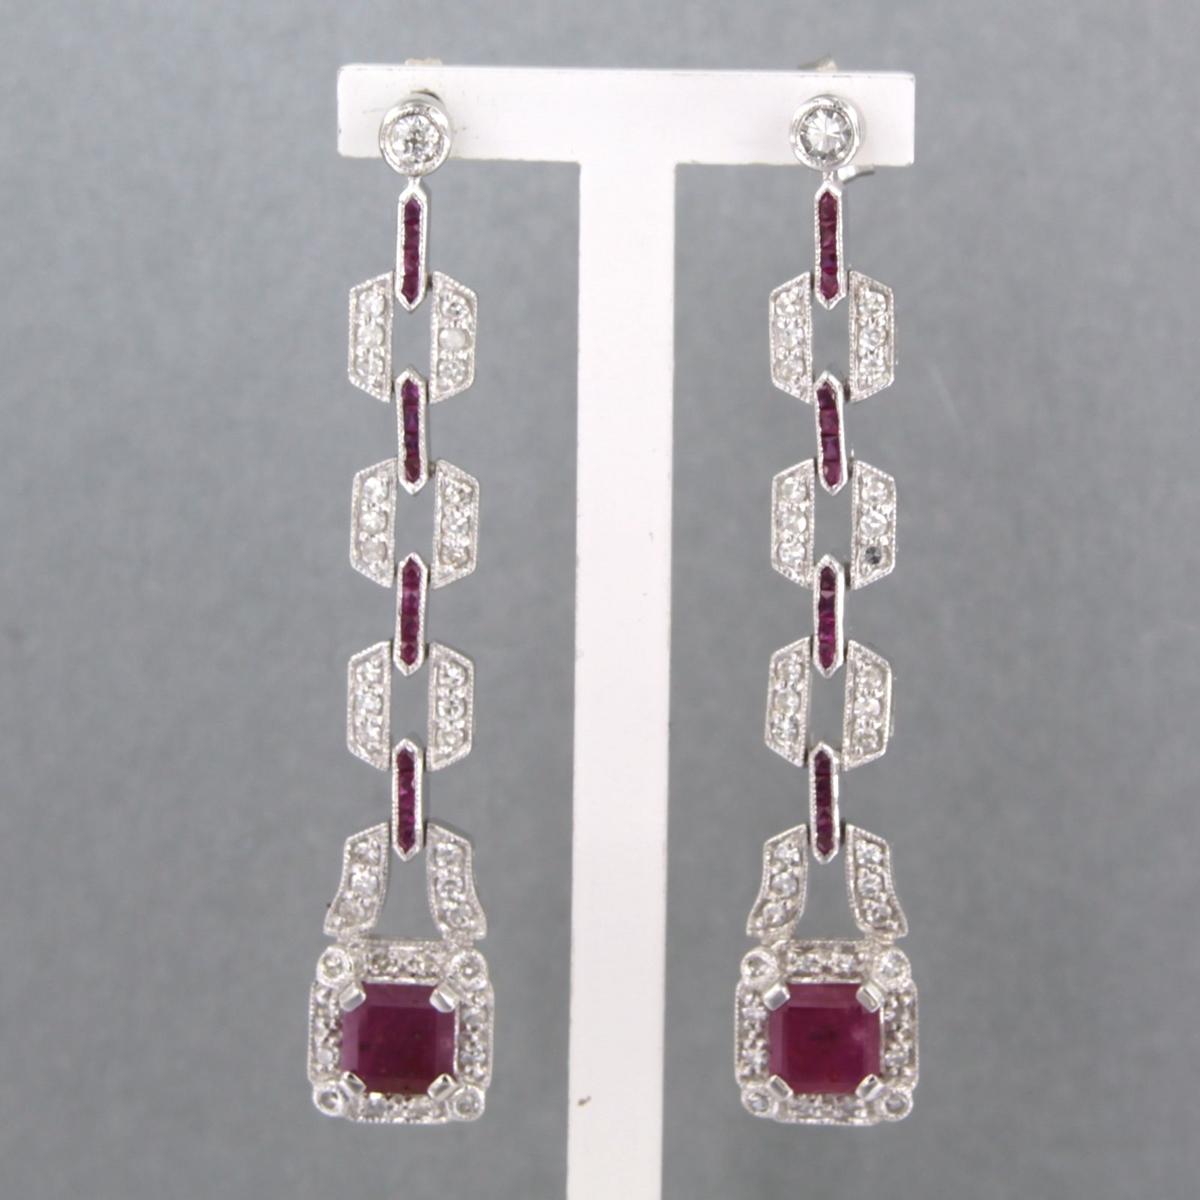 14k white gold earrings set with 3.50ct ruby, old mine cut and single cut diamonds up to. 1.04ct - F/G - VS/SI

detailed description:

The earrings are 8.3 cm high and 1.0 cm wide

weight: 9.5 grams

occupied with :

- 2 x 5.8 mm emmerald cut cut